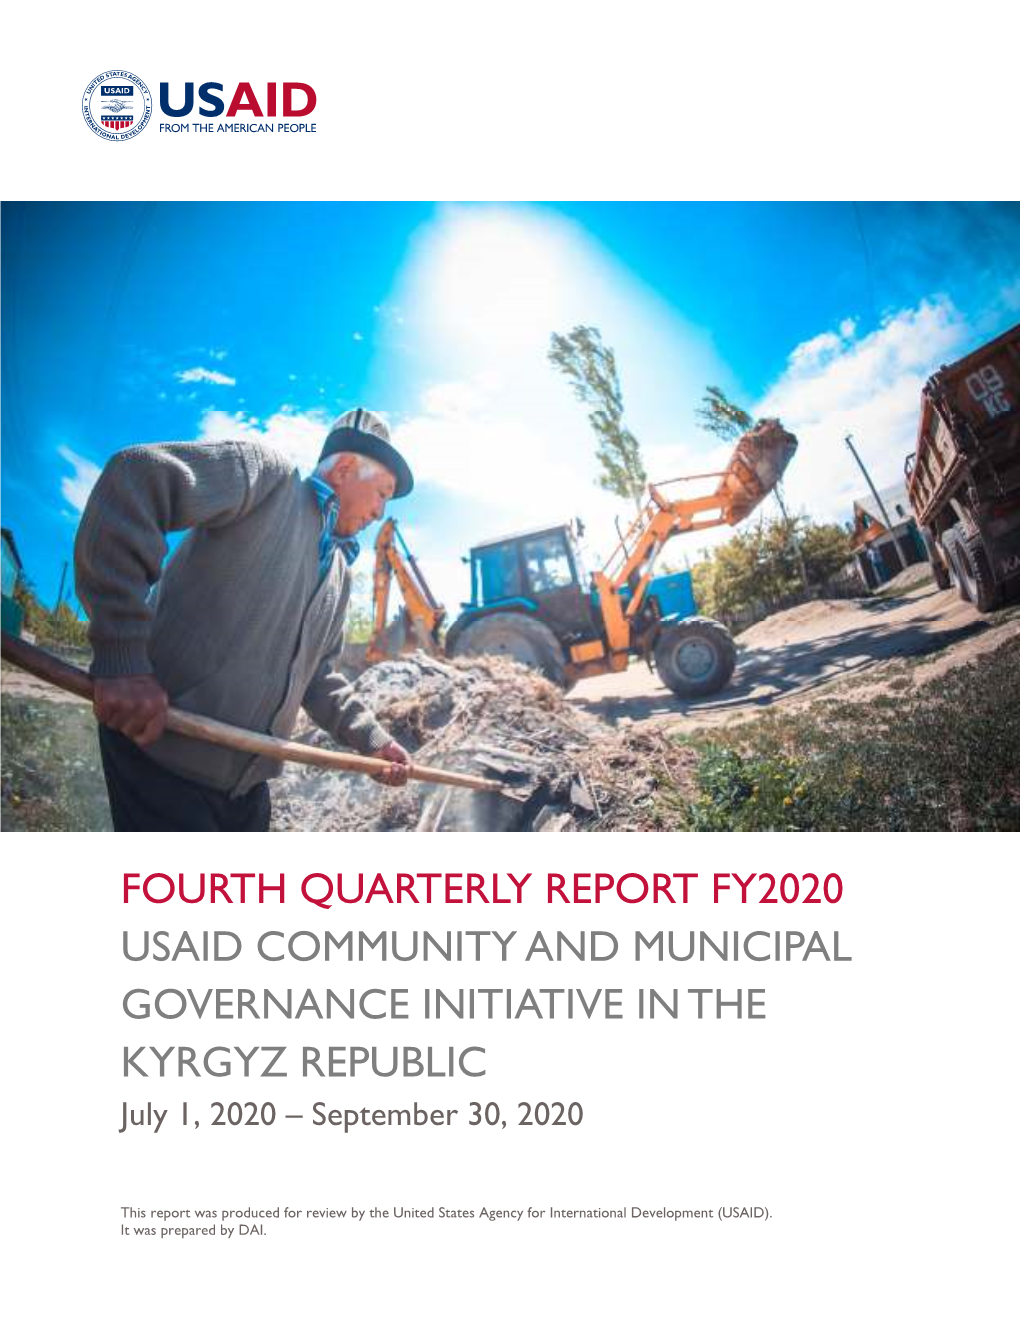 FOURTH QUARTERLY REPORT FY2020 USAID COMMUNITY and MUNICIPAL GOVERNANCE INITIATIVE in the KYRGYZ REPUBLIC July 1, 2020 – September 30, 2020